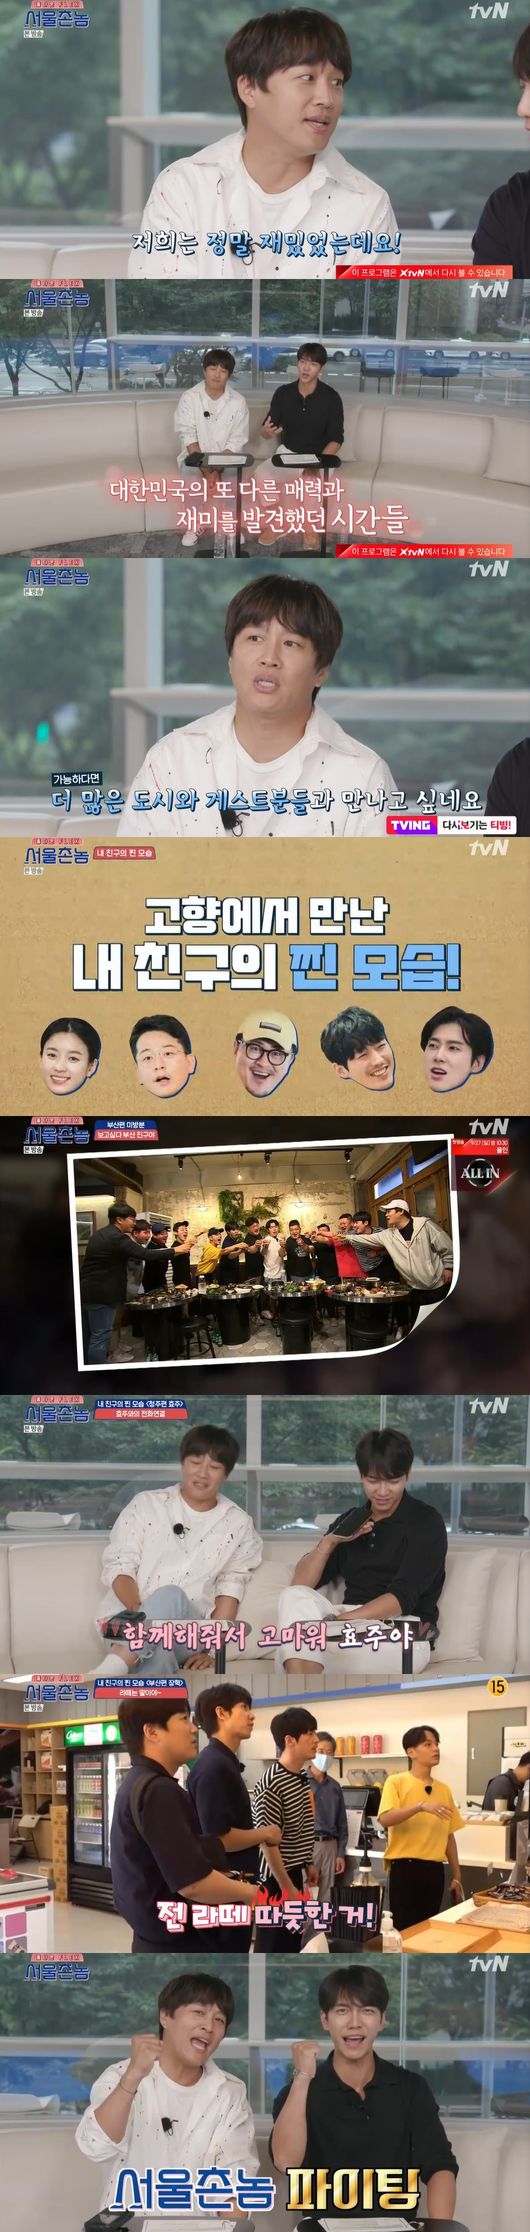 Lee Seung-gi and Cha Tae-hyun in Hometown Flex  failed to break the wall of COVID-19 and revealed their end.Everyone cheered for him to return to season 2.JTBC entertainment Hometown Flex  final broadcast on the 20th was broadcast.On the day of Hometown Flex  End, I want to go back to the taste BEST5 while the atmosphere of the highlights of today was revealed.Lee Seung-gi said, I had a record-breaking broadcast in 17 years of broadcasting history. Almost half of it would have been broadcast, and there were some things that were edited in time.Then, the special part of the rice flour was released, and the picture was drawn at a cafe operated by Friend of Jang Hyuk, which was edited in Youngdo.The production team said, Busan people will go on a I want to see Friend to confirm this, and Busan will call the acquaintance and say that the person who called the most will win.In all expectations, Ssamdi was the son of Ssamdi, and finally Ssamdi became the king of honor.We are home to real friends, he said. Lets drink until we are 90 years old.The story of the poor performance was drawn on the memorable tour of Cheongju Broadcasting, starring Han Hyo-joo.Han Hyo-joo said, I have never cried out on the air, but it is a strange and strange feeling. It is a space with time and memories of my childhood.Among them, Cha Tae-hyun mentioned the lattemi from the Hudangmi of Jang Hyuk on the side of Busan, and Cha Tae-hyun said, I know it well in my life. Lee Seung-gi said, The image of Chuno is strong, but it was a reversal story charm.Jang Hyuk said, I was doing a latte a day, he said, I called you after the broadcast and said, It was hard for me.I had a clinical trial, said Jang Hyuk, who said, I had a good system, and I liked it when I was home. Cha Tae-hyun said, You did not know about your hometown. Cha Tae-hyun said, It is important to go home, I saw it like I saw it for the first time.Cha Tae-hyun and Lee Seung-gi said, This is a Seoul team. Jang Hyuk laughed, saying, I will go anytime I call it open.I then called Han Hyo-joo, who was worried about the entertainment appearance before shooting.Han Hyo-joo said, The feelings I met at Cheongju Broadcasting were special, and I was heartbroken. I am grateful that the places of memories are made like an album.Lee Seung-gi and Cha Tae-hyun said, I hope you enjoyed another charm and fun time in Korea, and you have enjoyed your trip to Hometown Flex. I hope the COVID-19 situation will improve quickly and I can have a good place and guest.The two people added, Everyone should be careful about health care, and I hope to meet again in a good environment.Hometown Flex  captures the broadcast screen